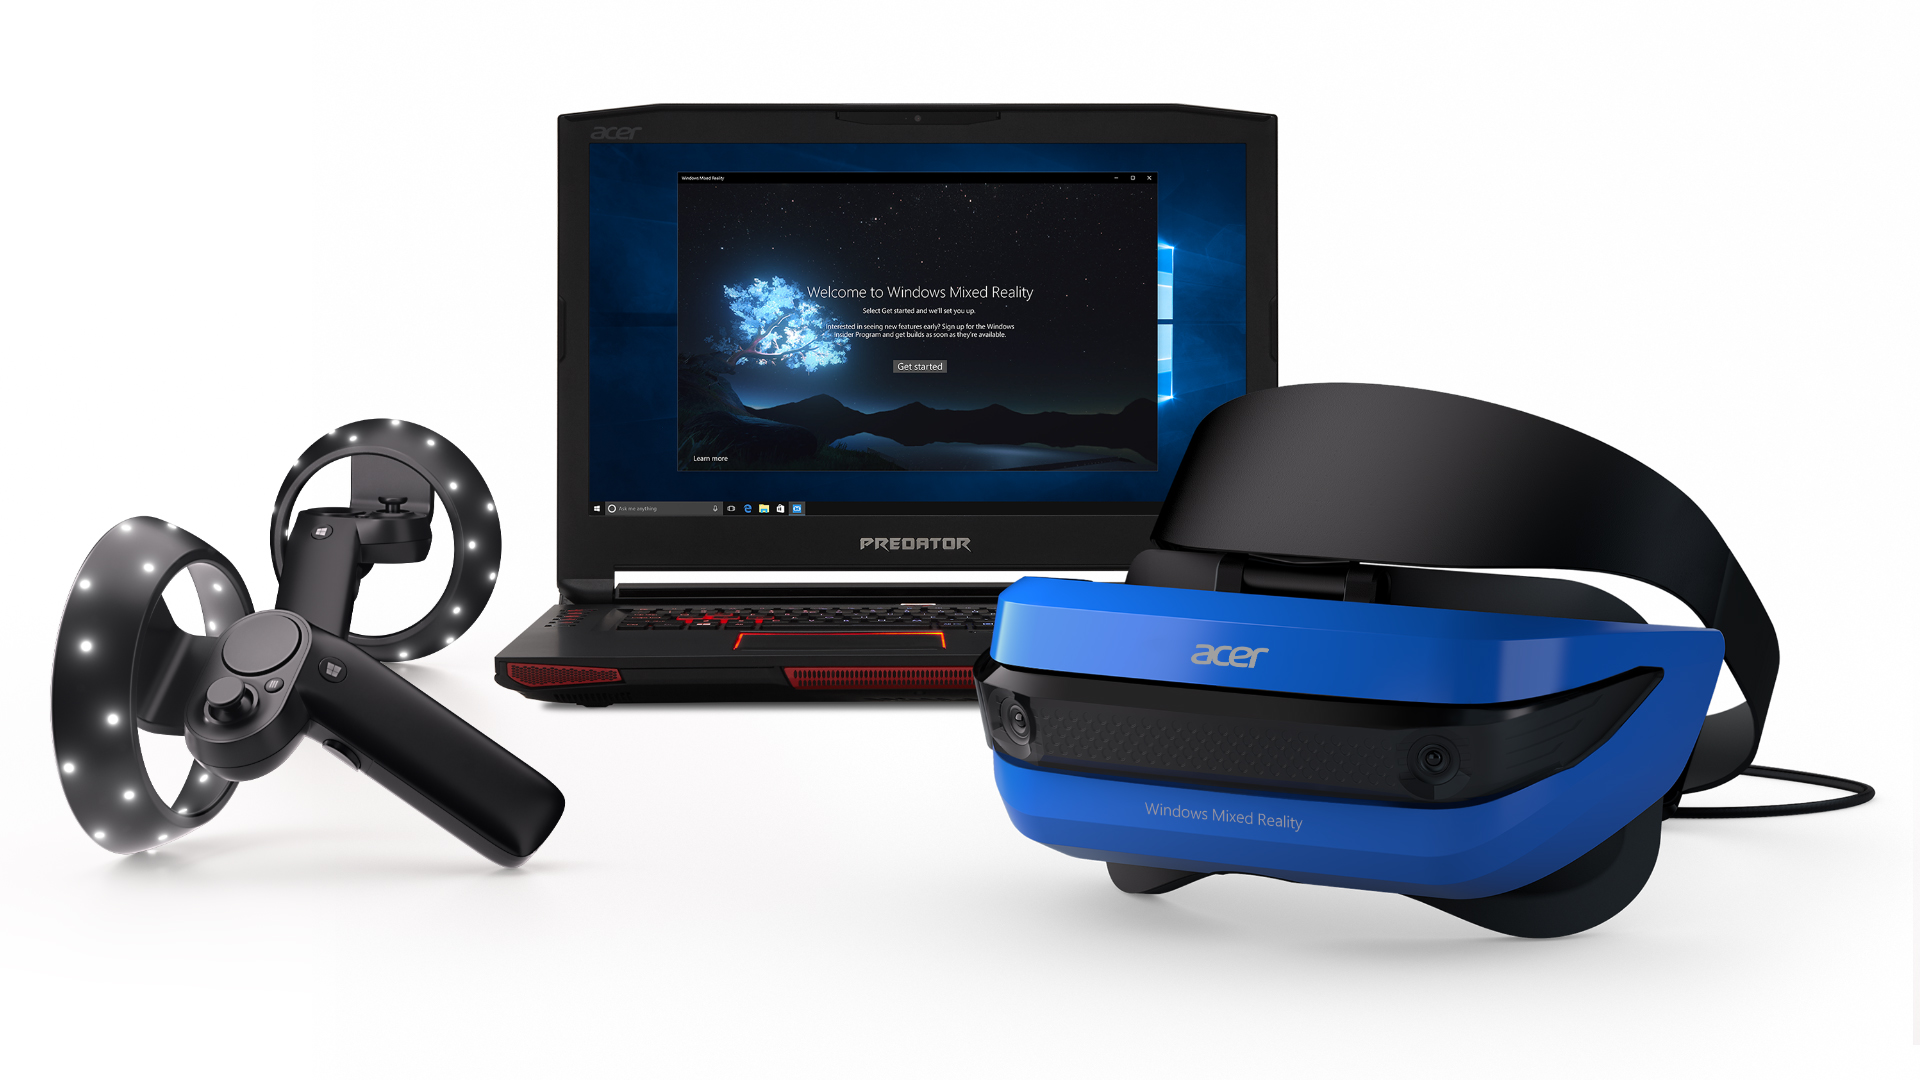 Acer Windows Mixed Reality headset and motion controller bundle priced at $399 this holiday. 